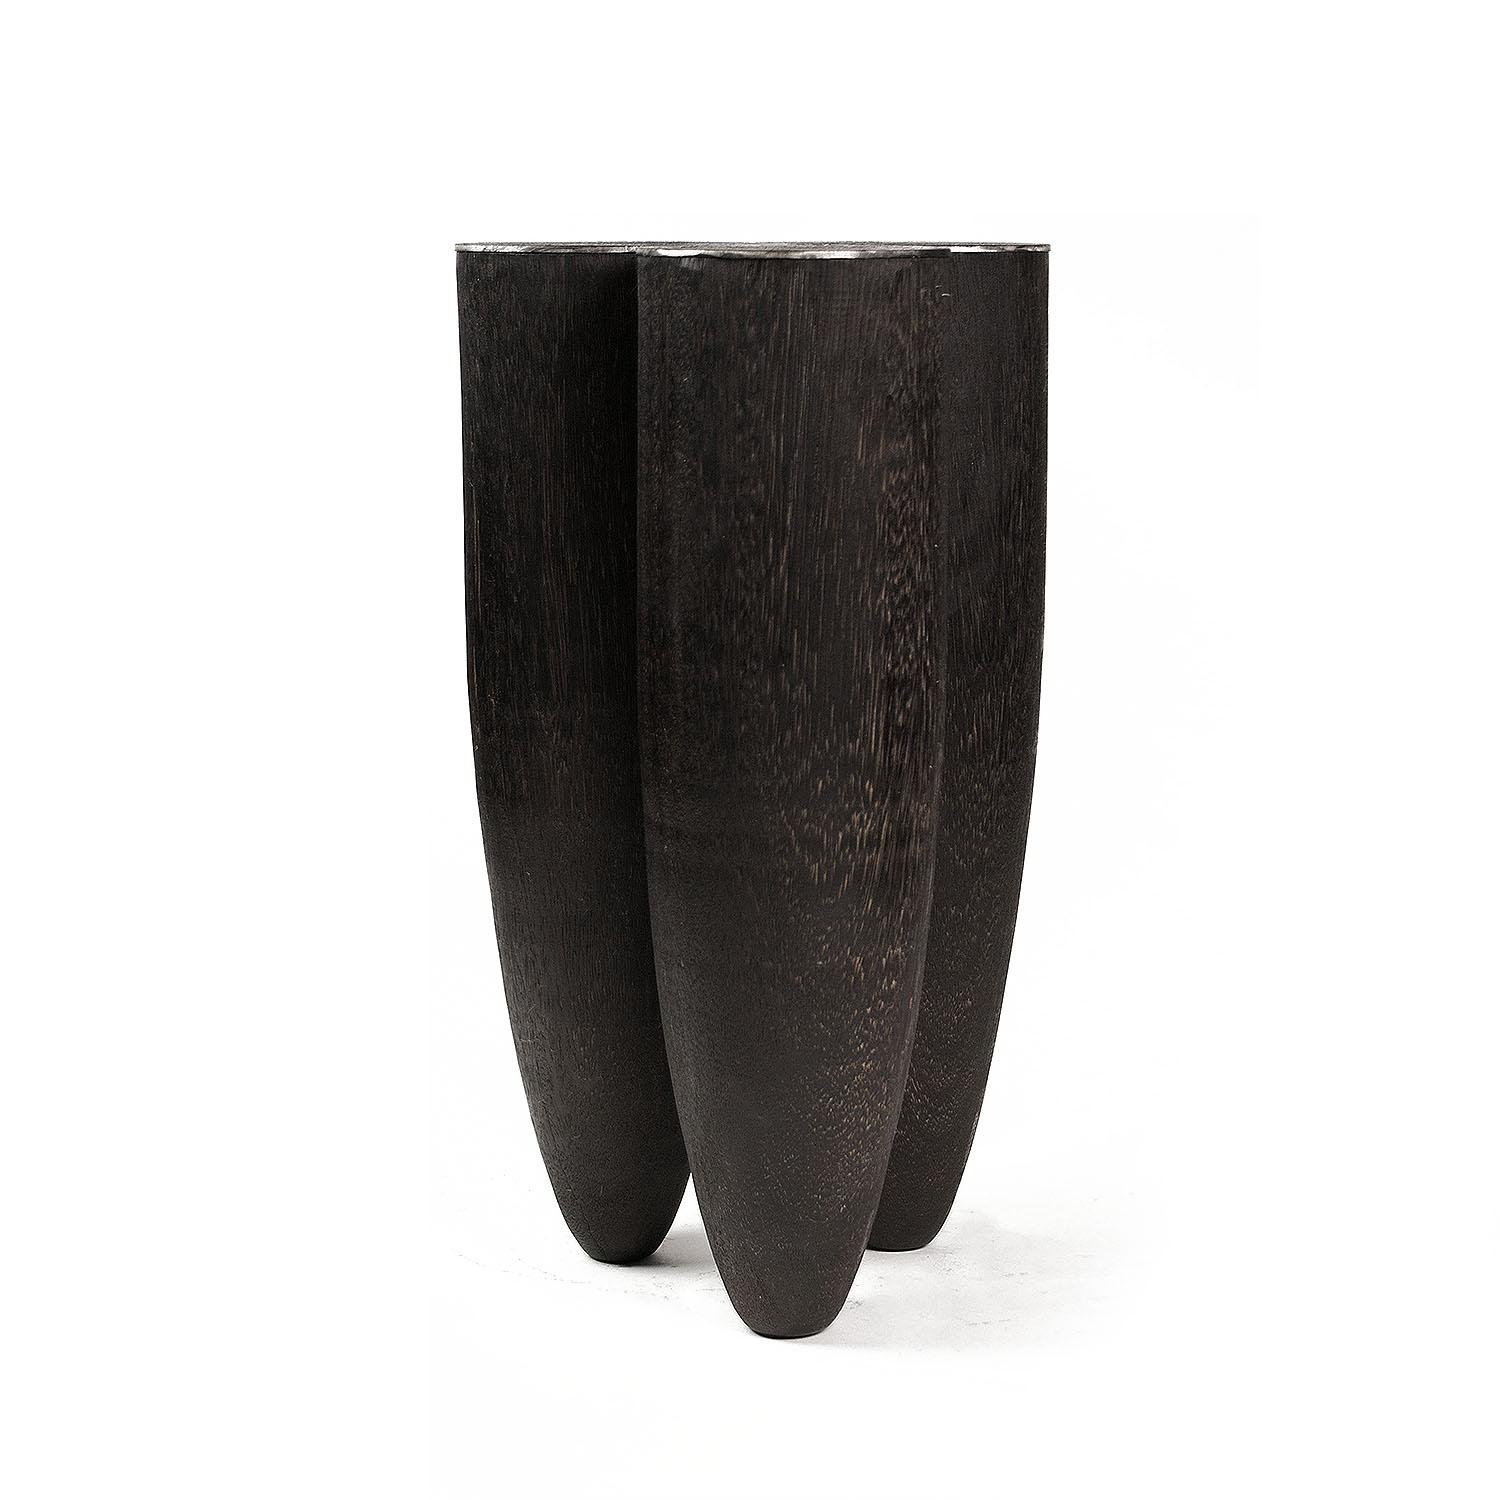 Contemporary Black Stool in Iroko Wood, Senufo by Arno Declercq

Material: Iroko Wood and Burned Steel
Dimensions: Dimensions: 50 cm H x 30 cm W

Made by hand, in Belgium.

Arno Declercq
Belgian designer and art dealer who makes bespoke objects with